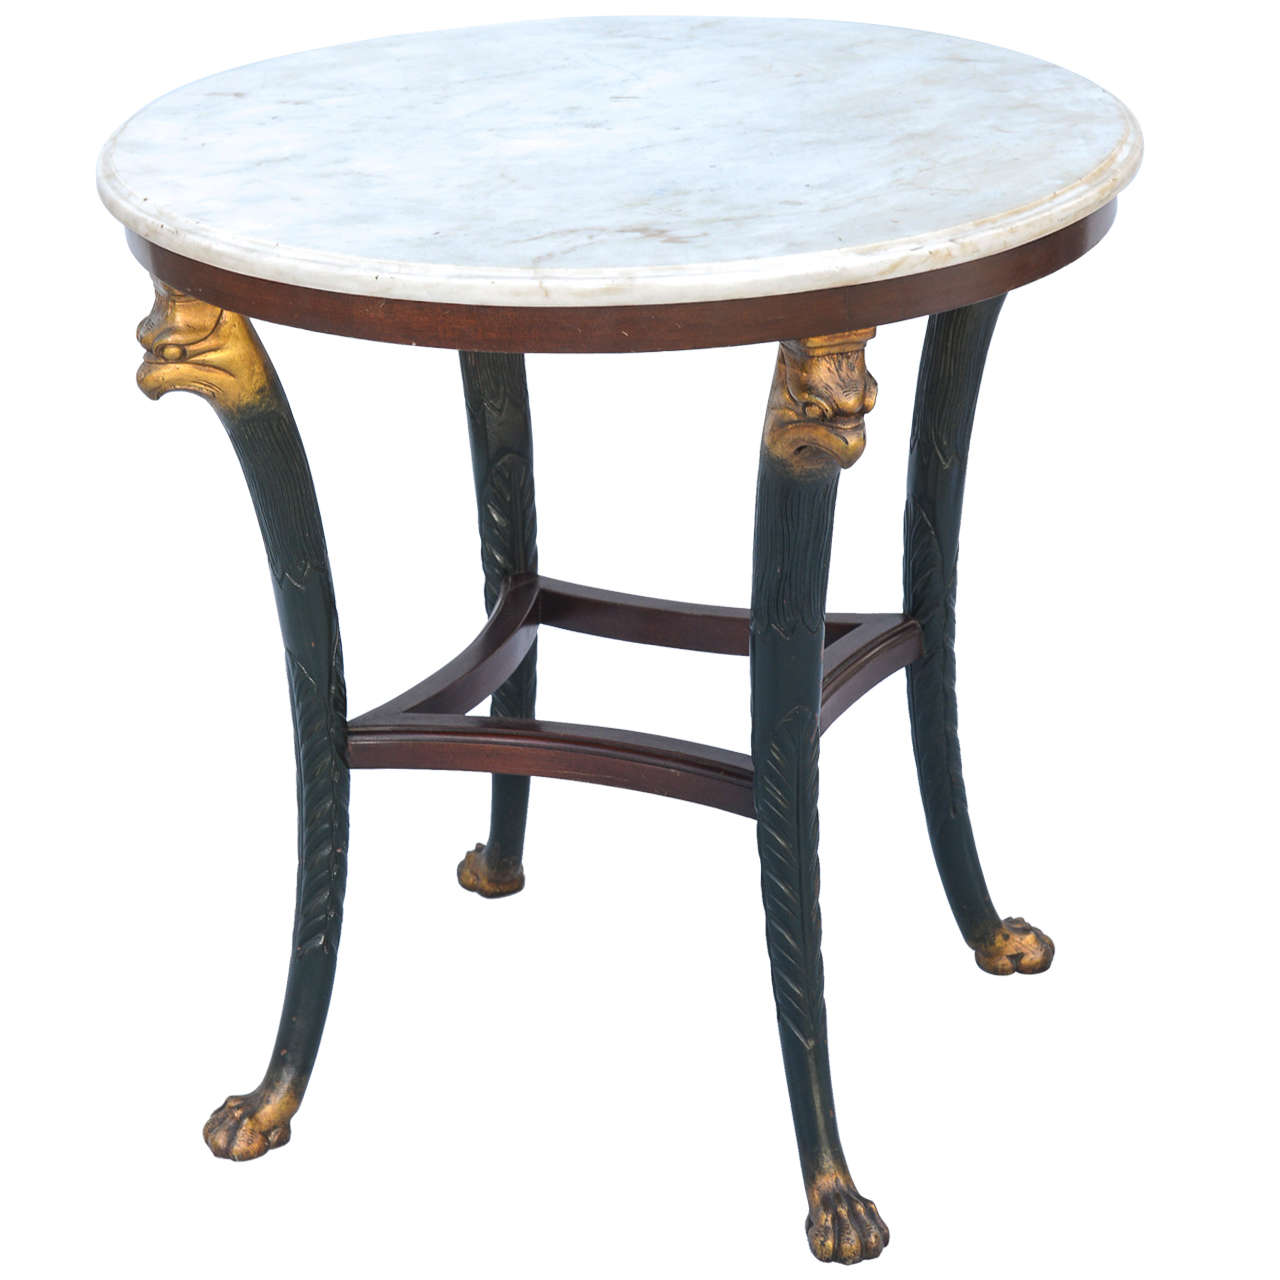 Regency Style Occasional Table with Carrara Marble Top